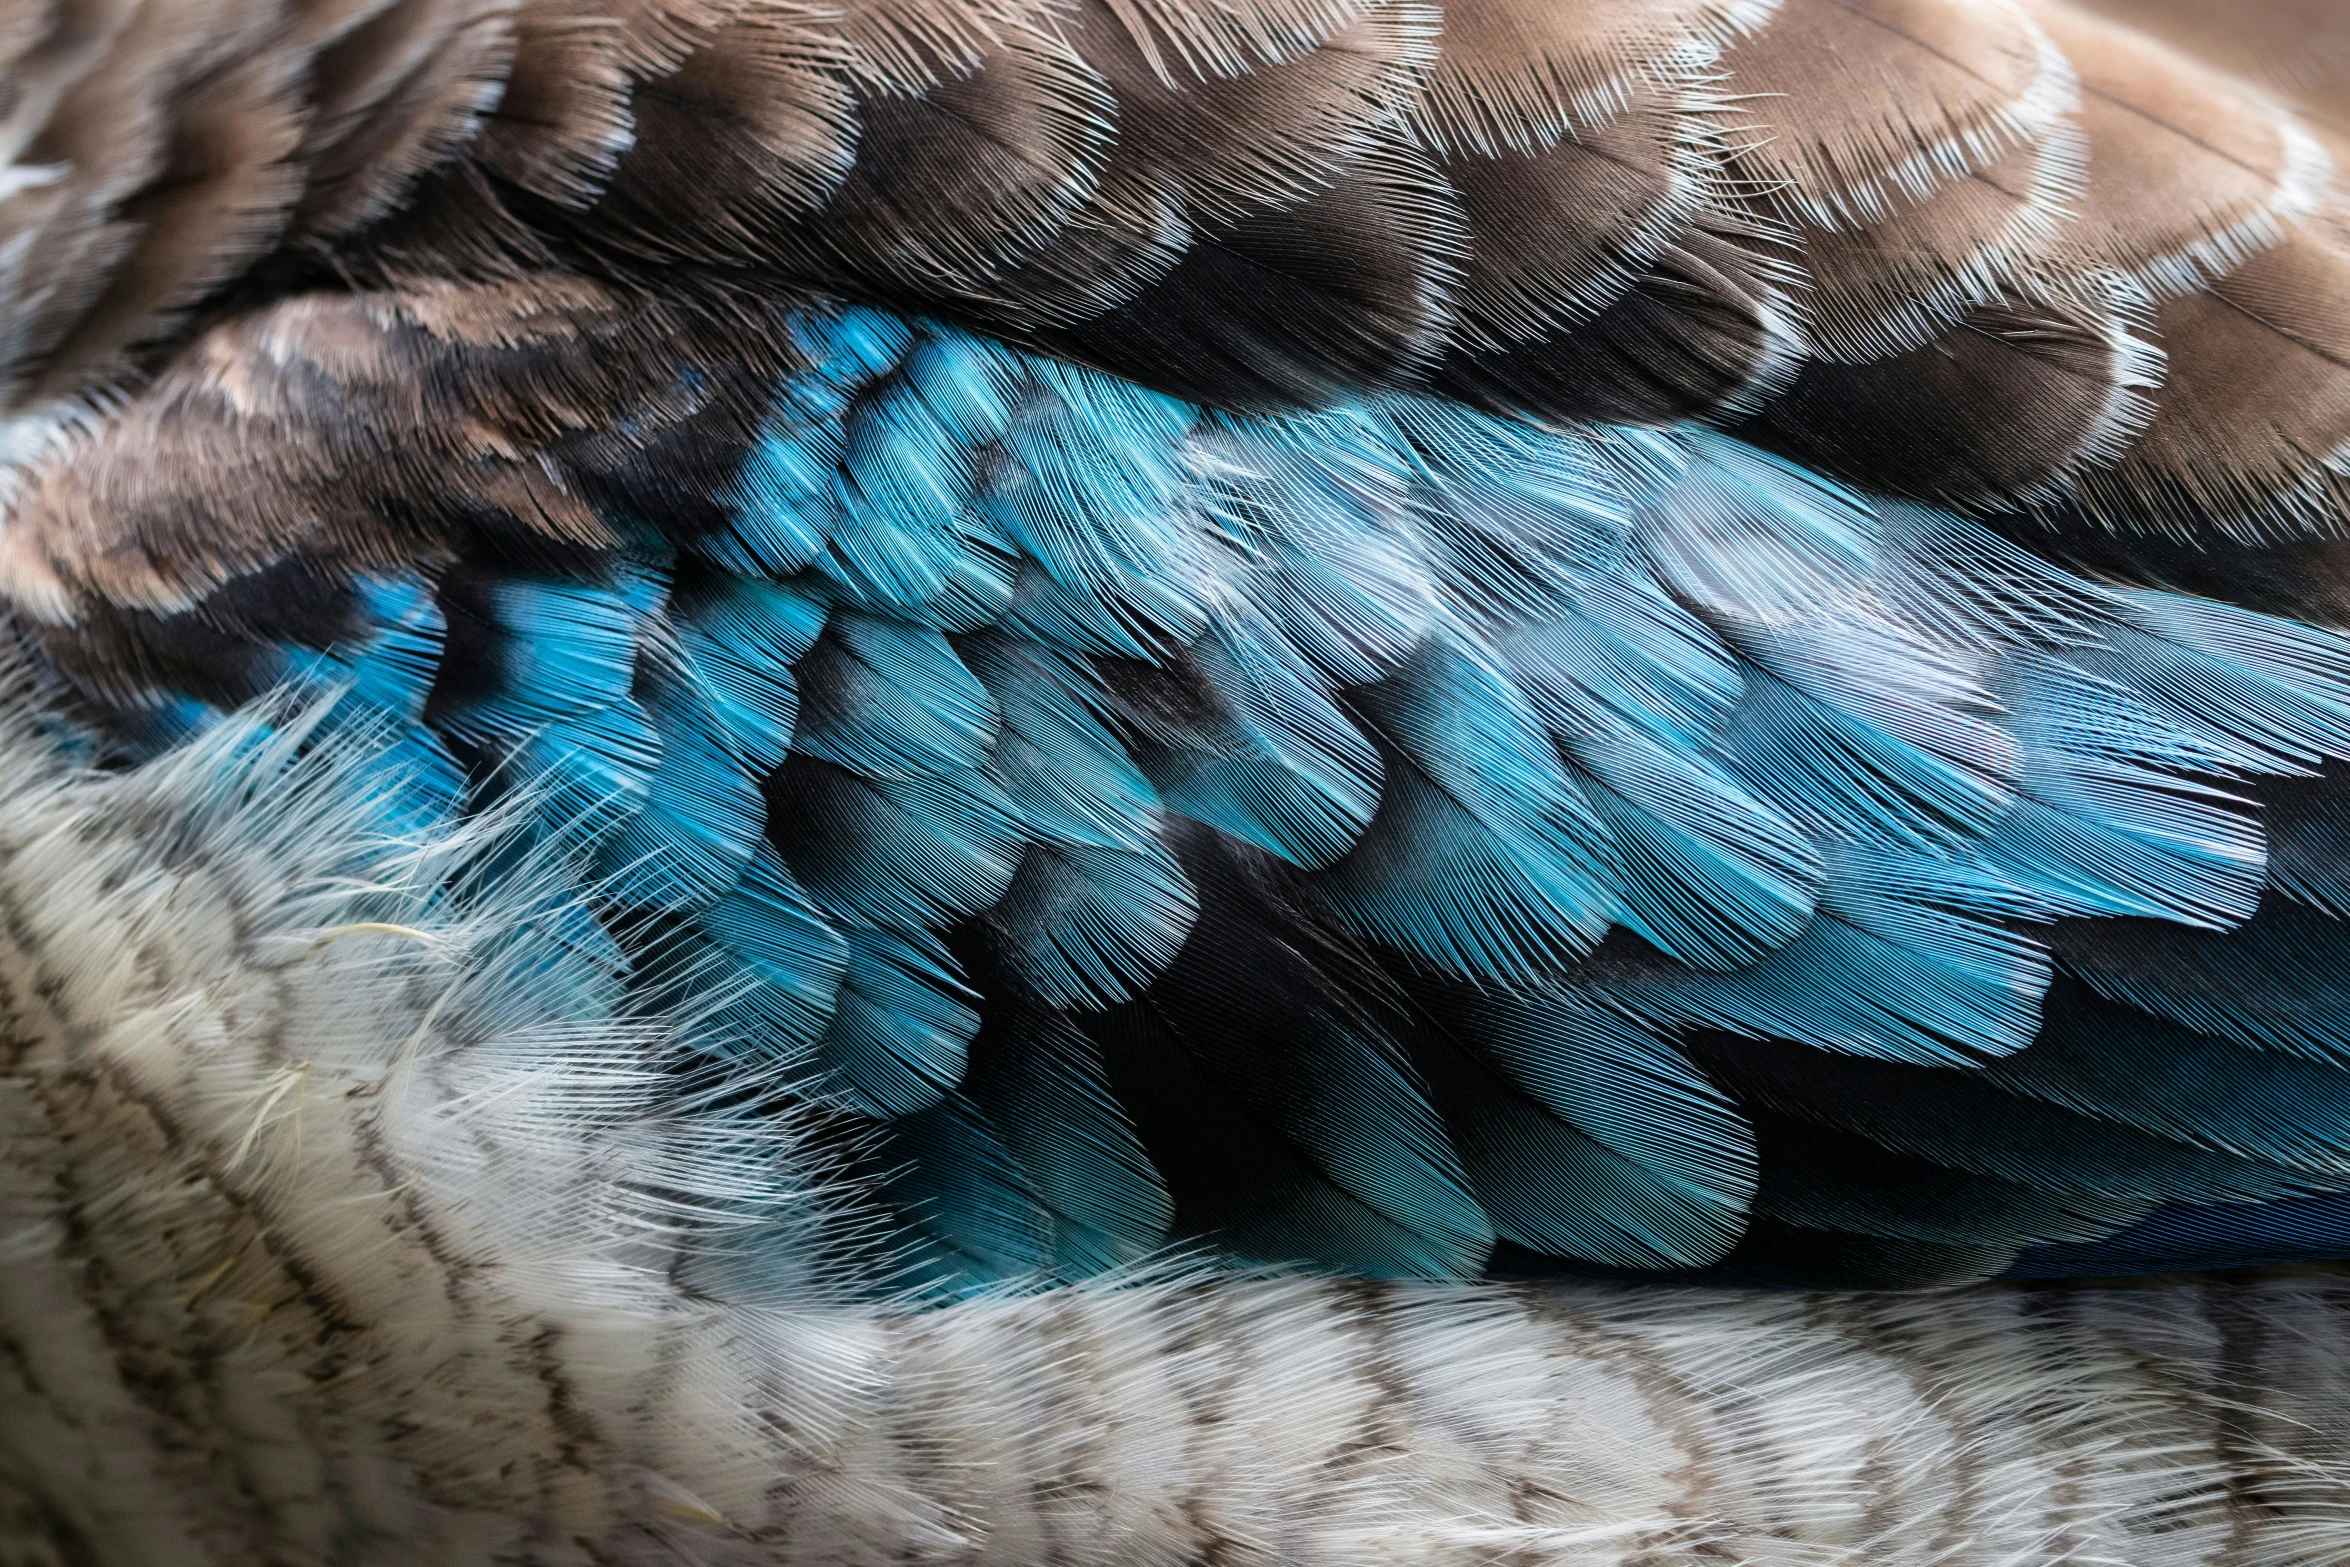 an image of close up on the feathers of a bird